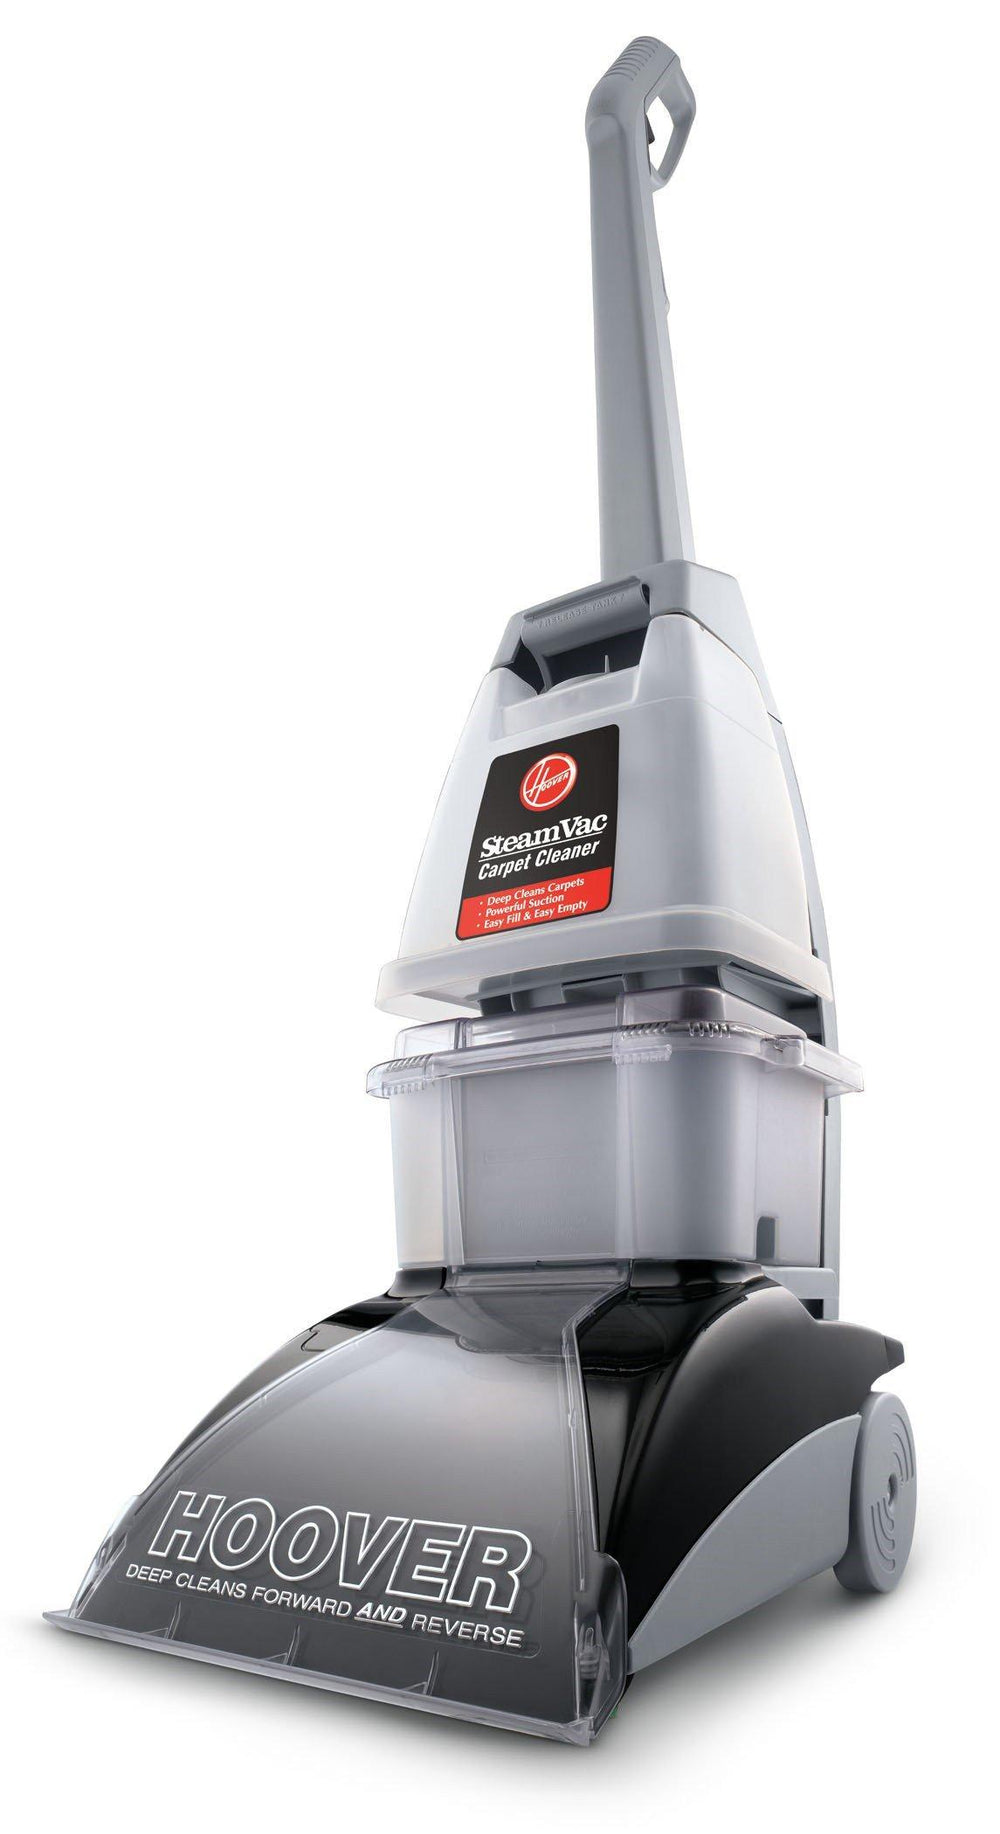 Reconditioned SteamVac Carpet Cleaner2